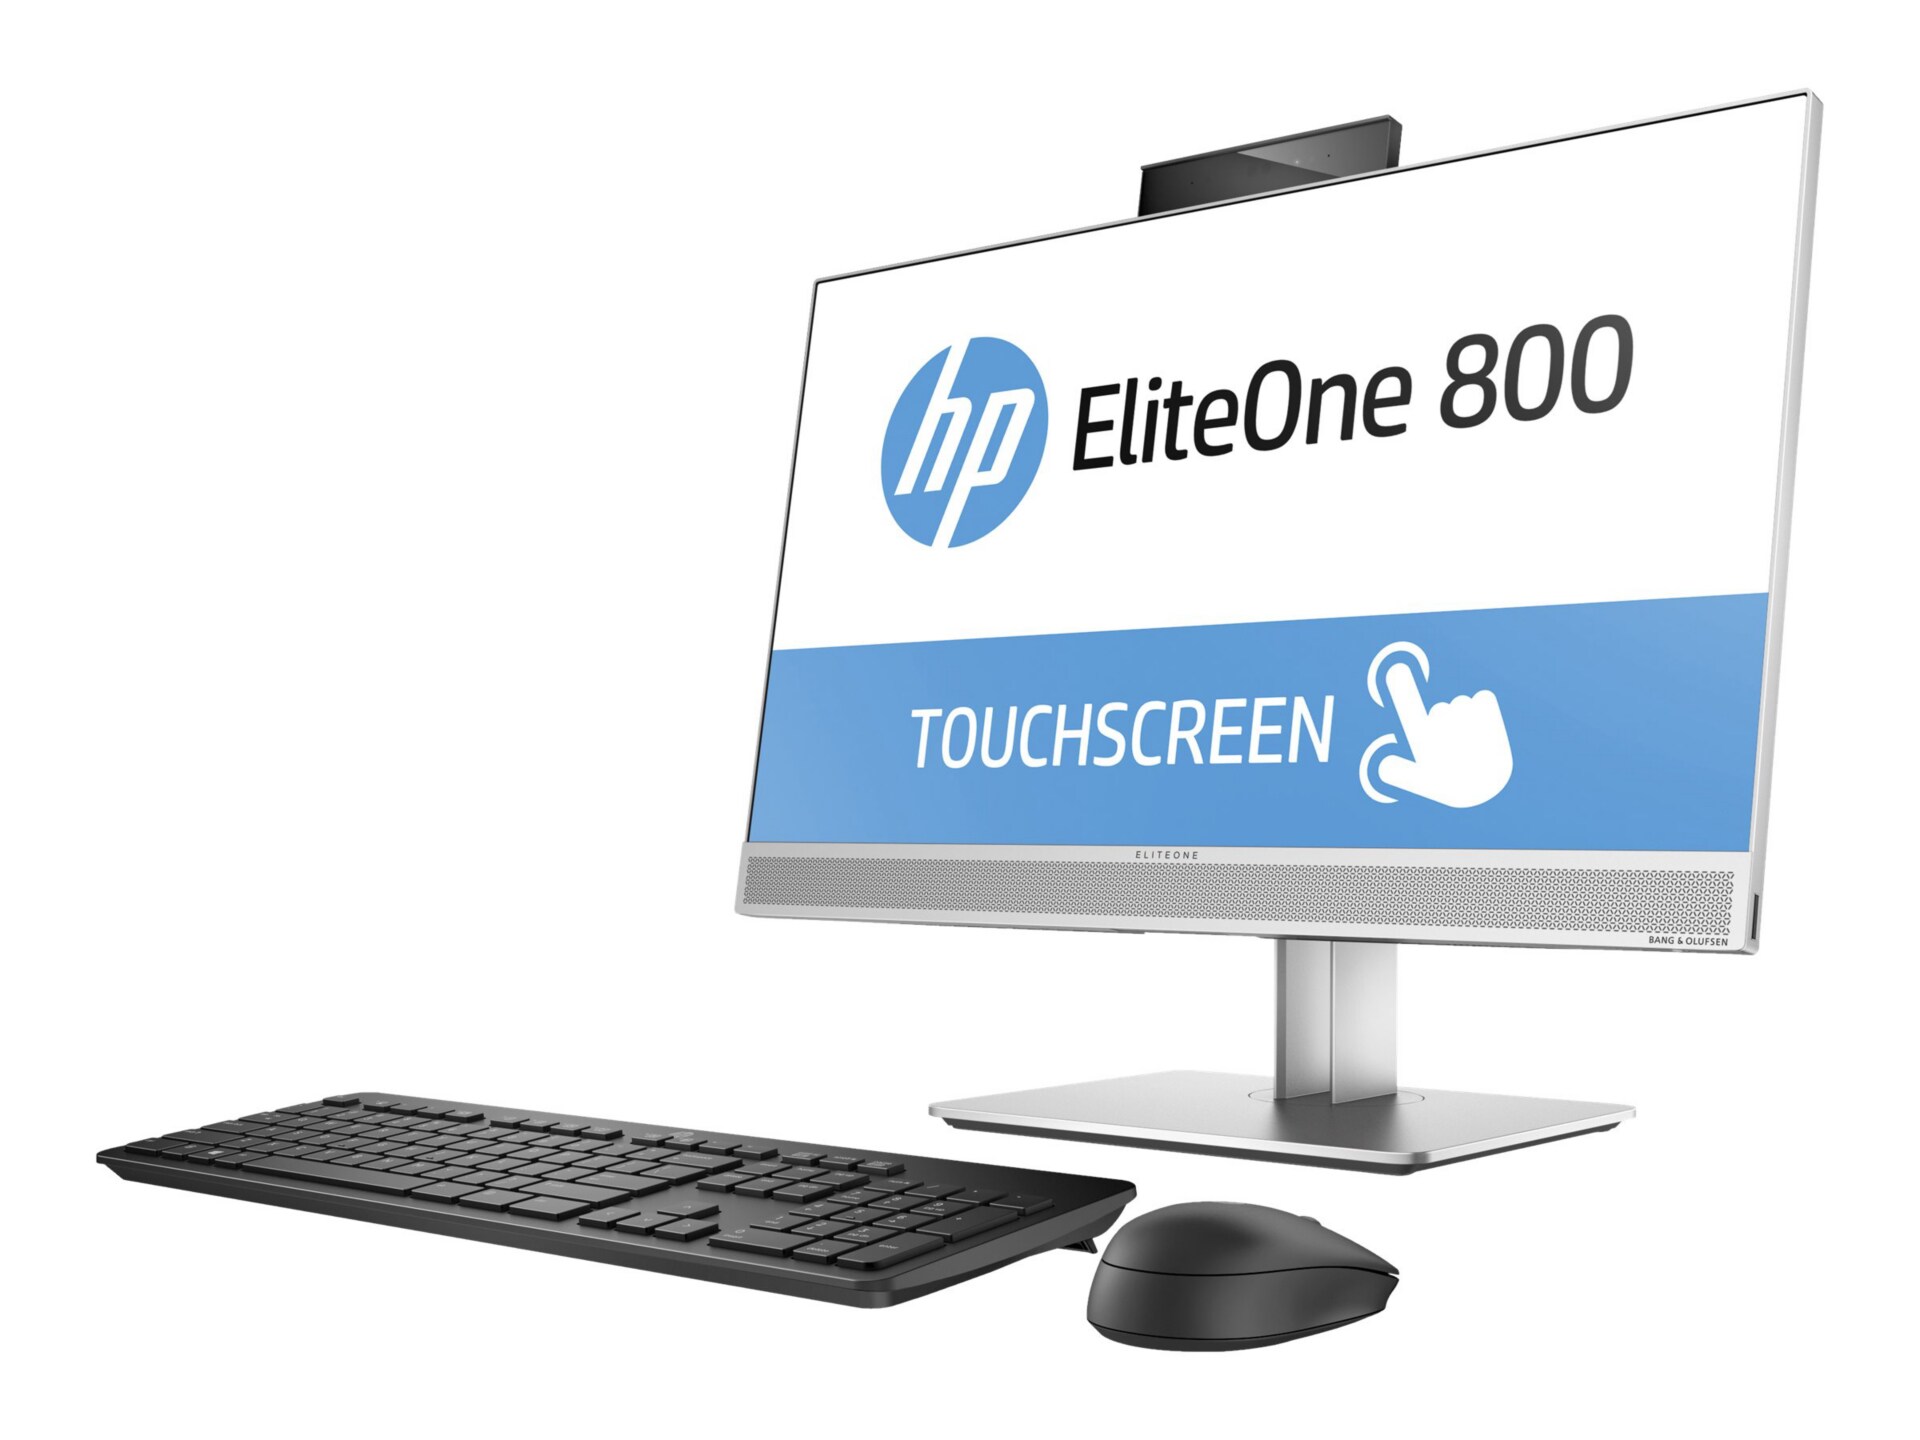 HP EliteOne 800 G3 - all-in-one - Core i5 6600 3.2 GHz - 8 GB - 256 GB - LED 23.8" - US